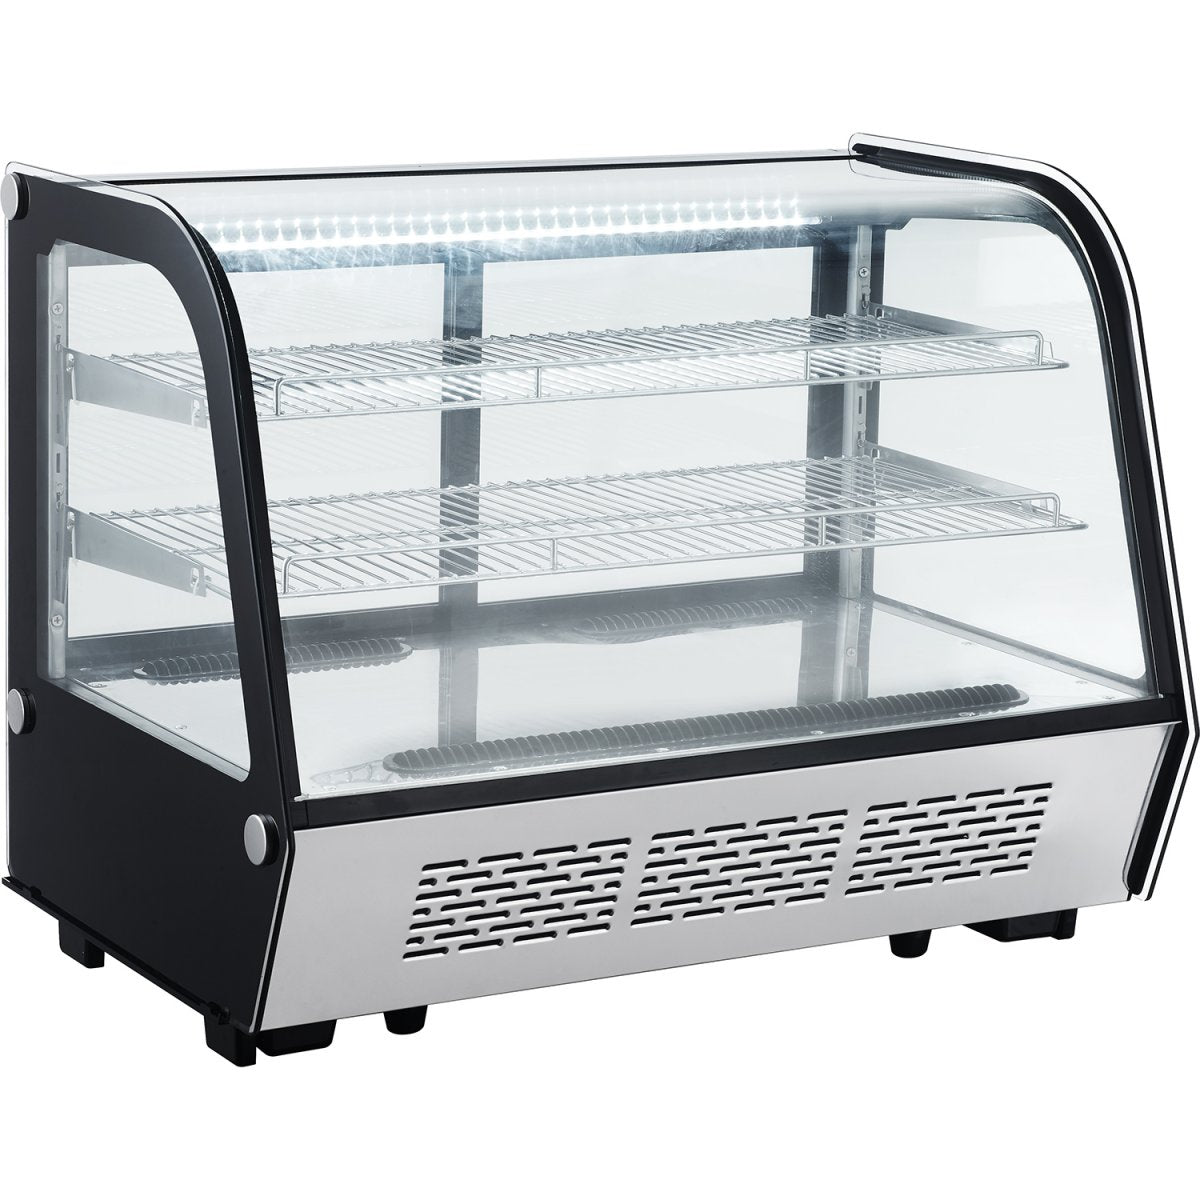 Heated Display Case 120 litres Countertop .Product ref:00244.🚚 5-7 Days Delivery